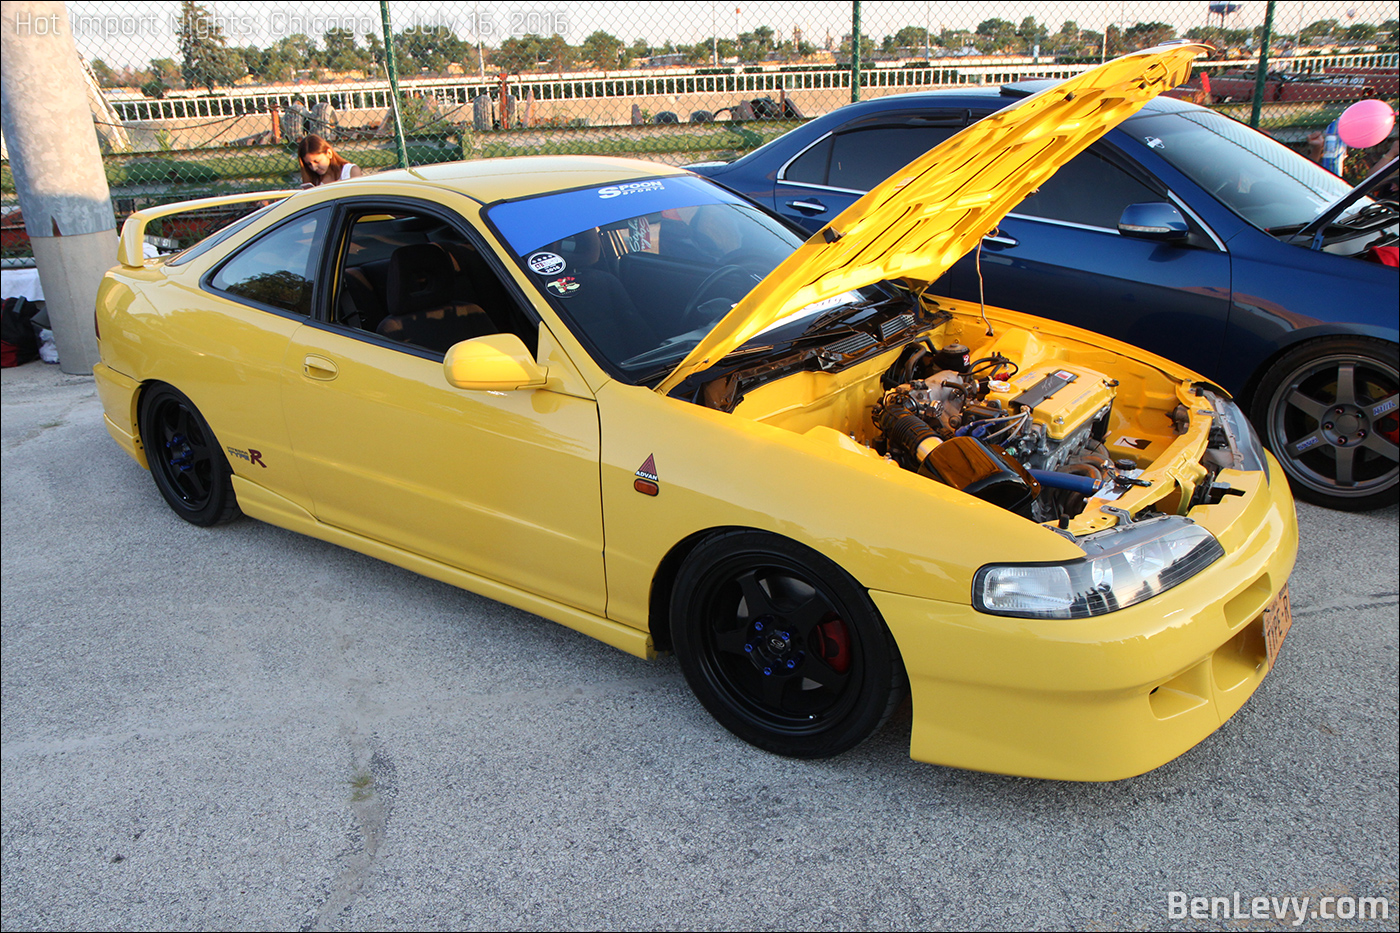 Yellow Acura Integra Type-R with JDM Front